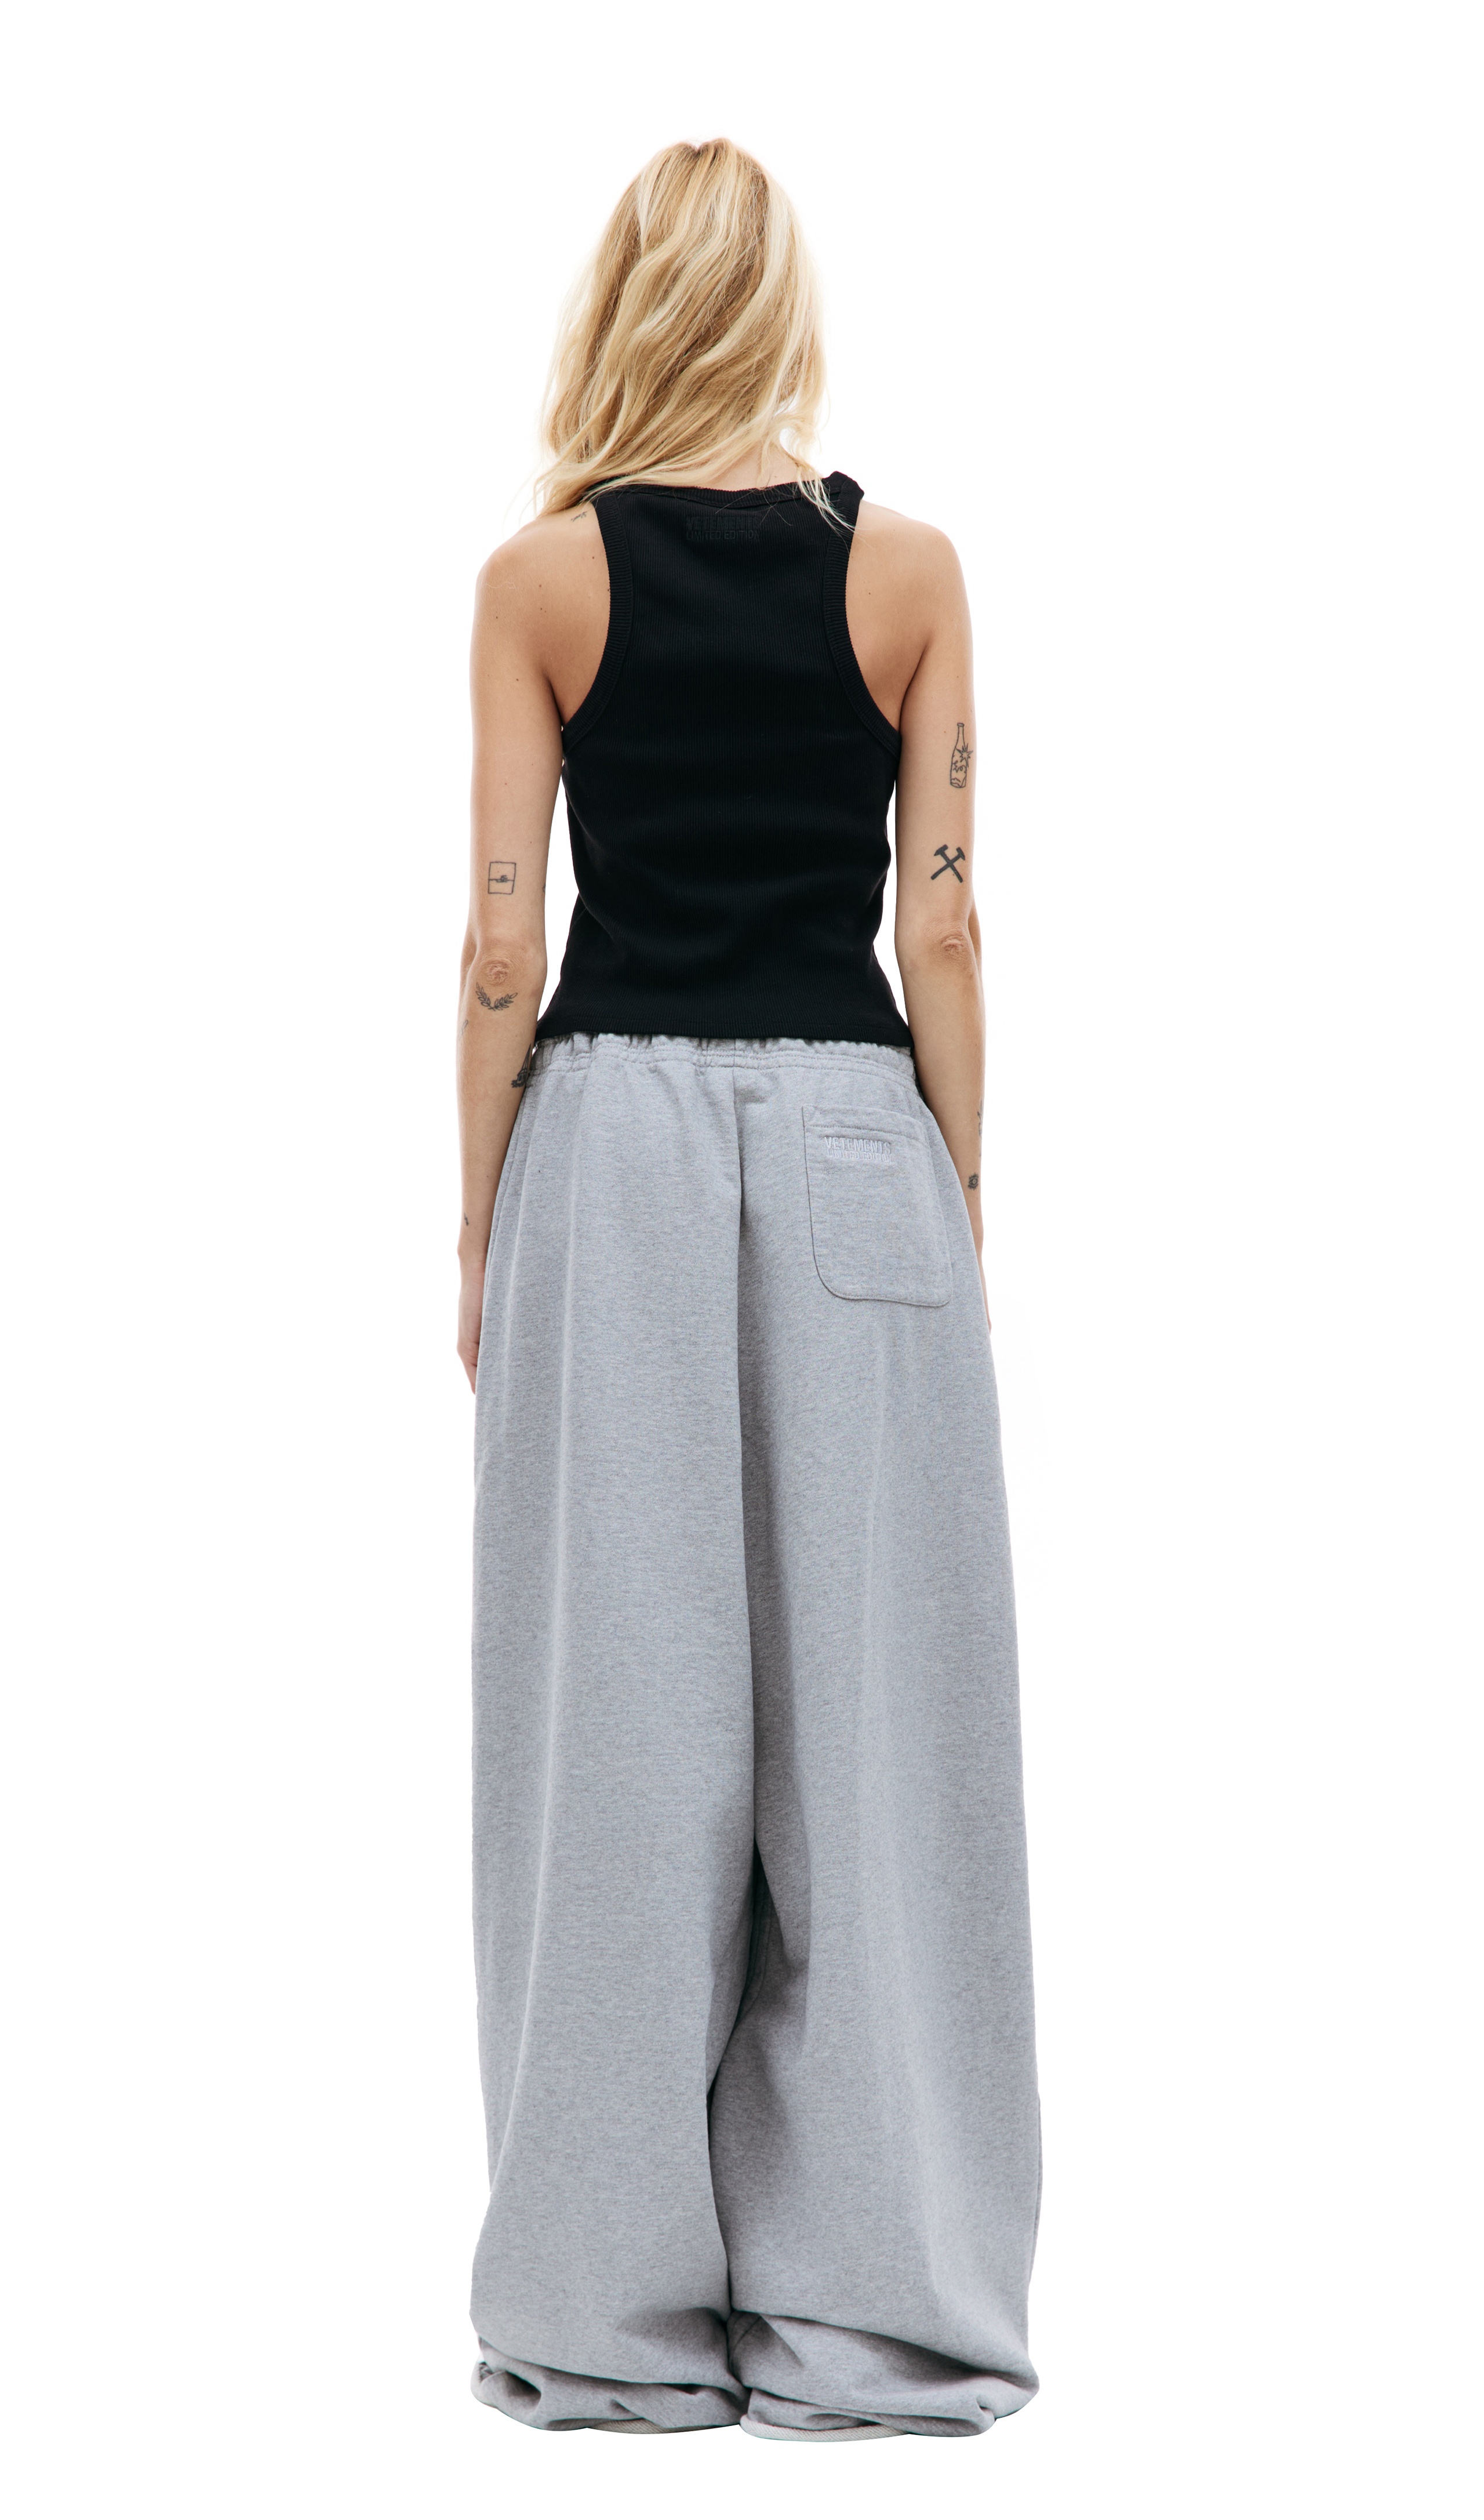 GREY EMBROIDERED SWEATPANTS - 3